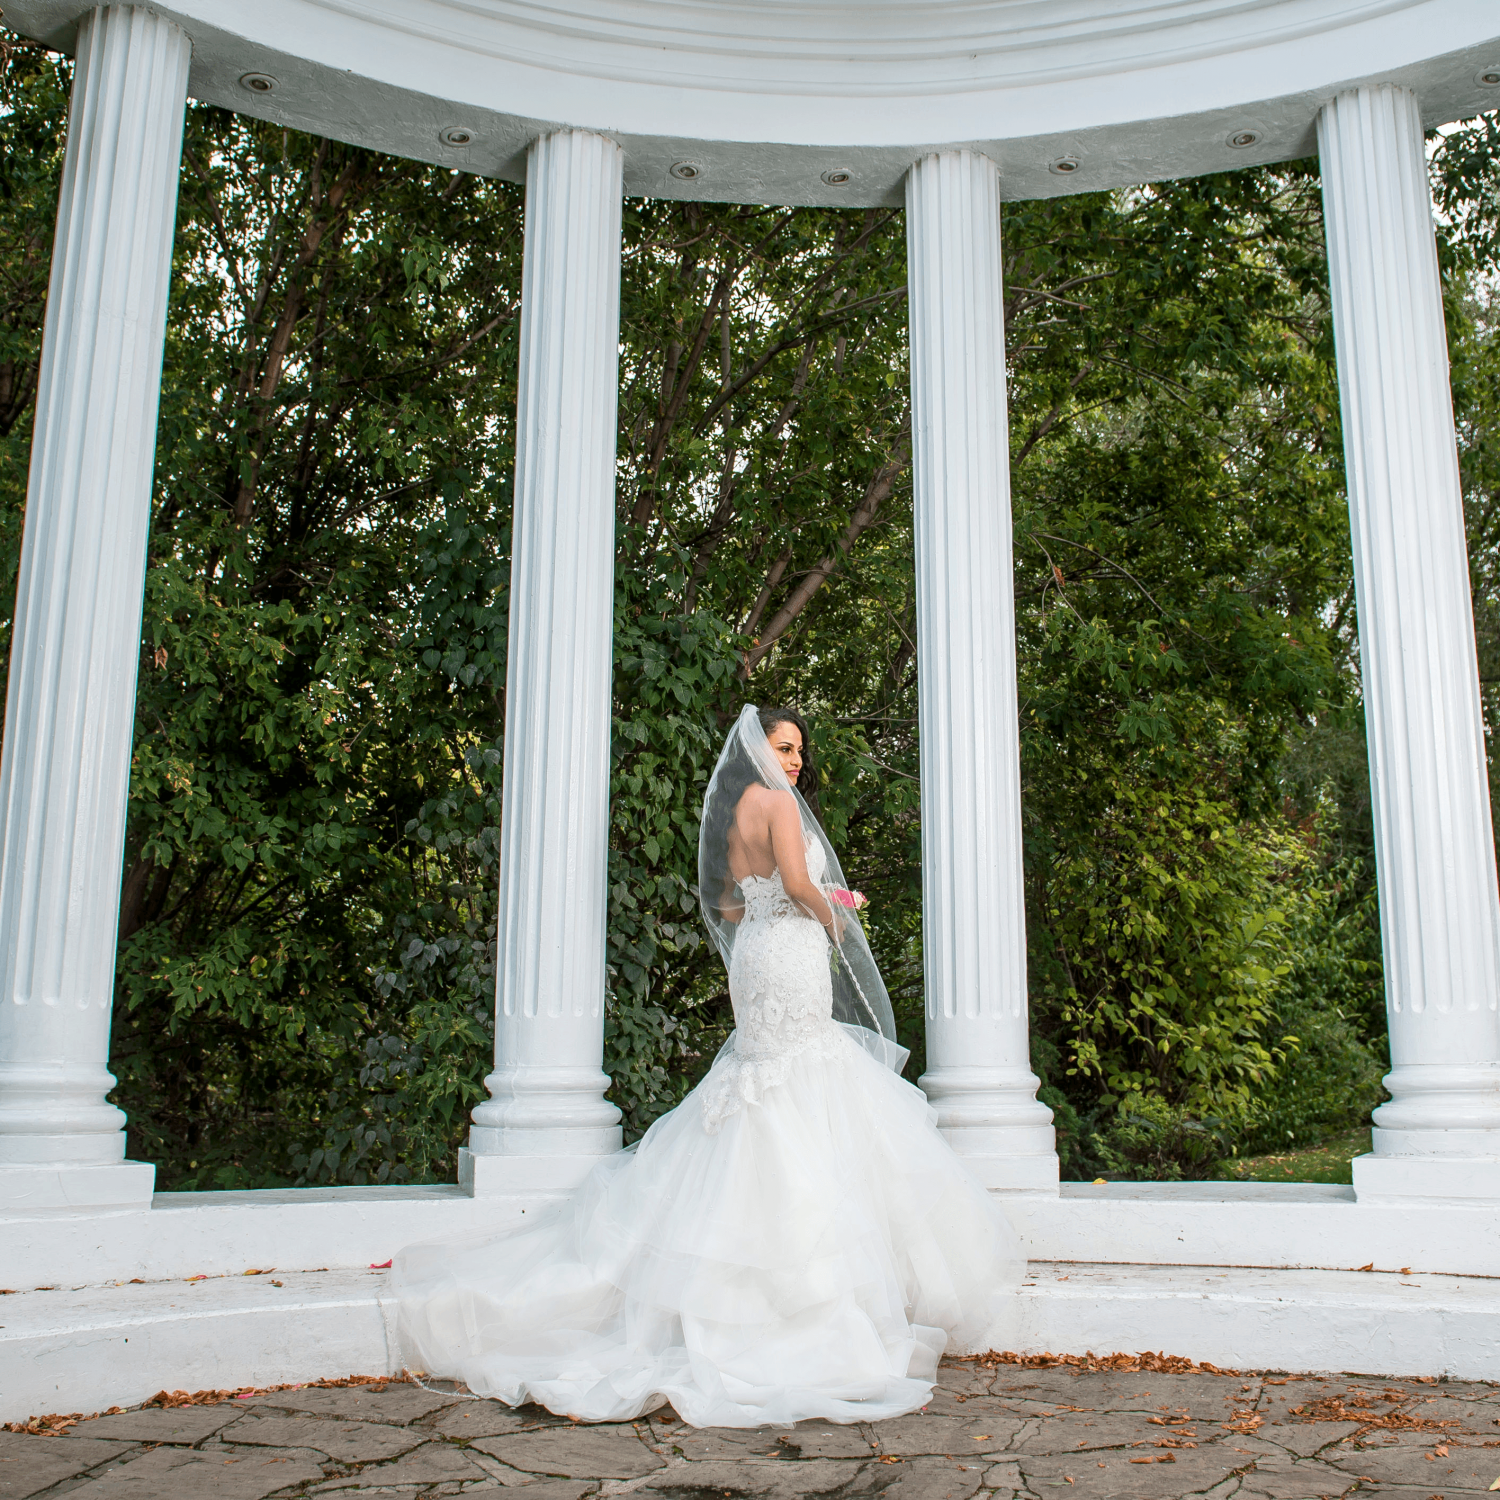 A bride standing in the Paradise Banquet Halls garden venue's columned area with lush, green trees in the background.